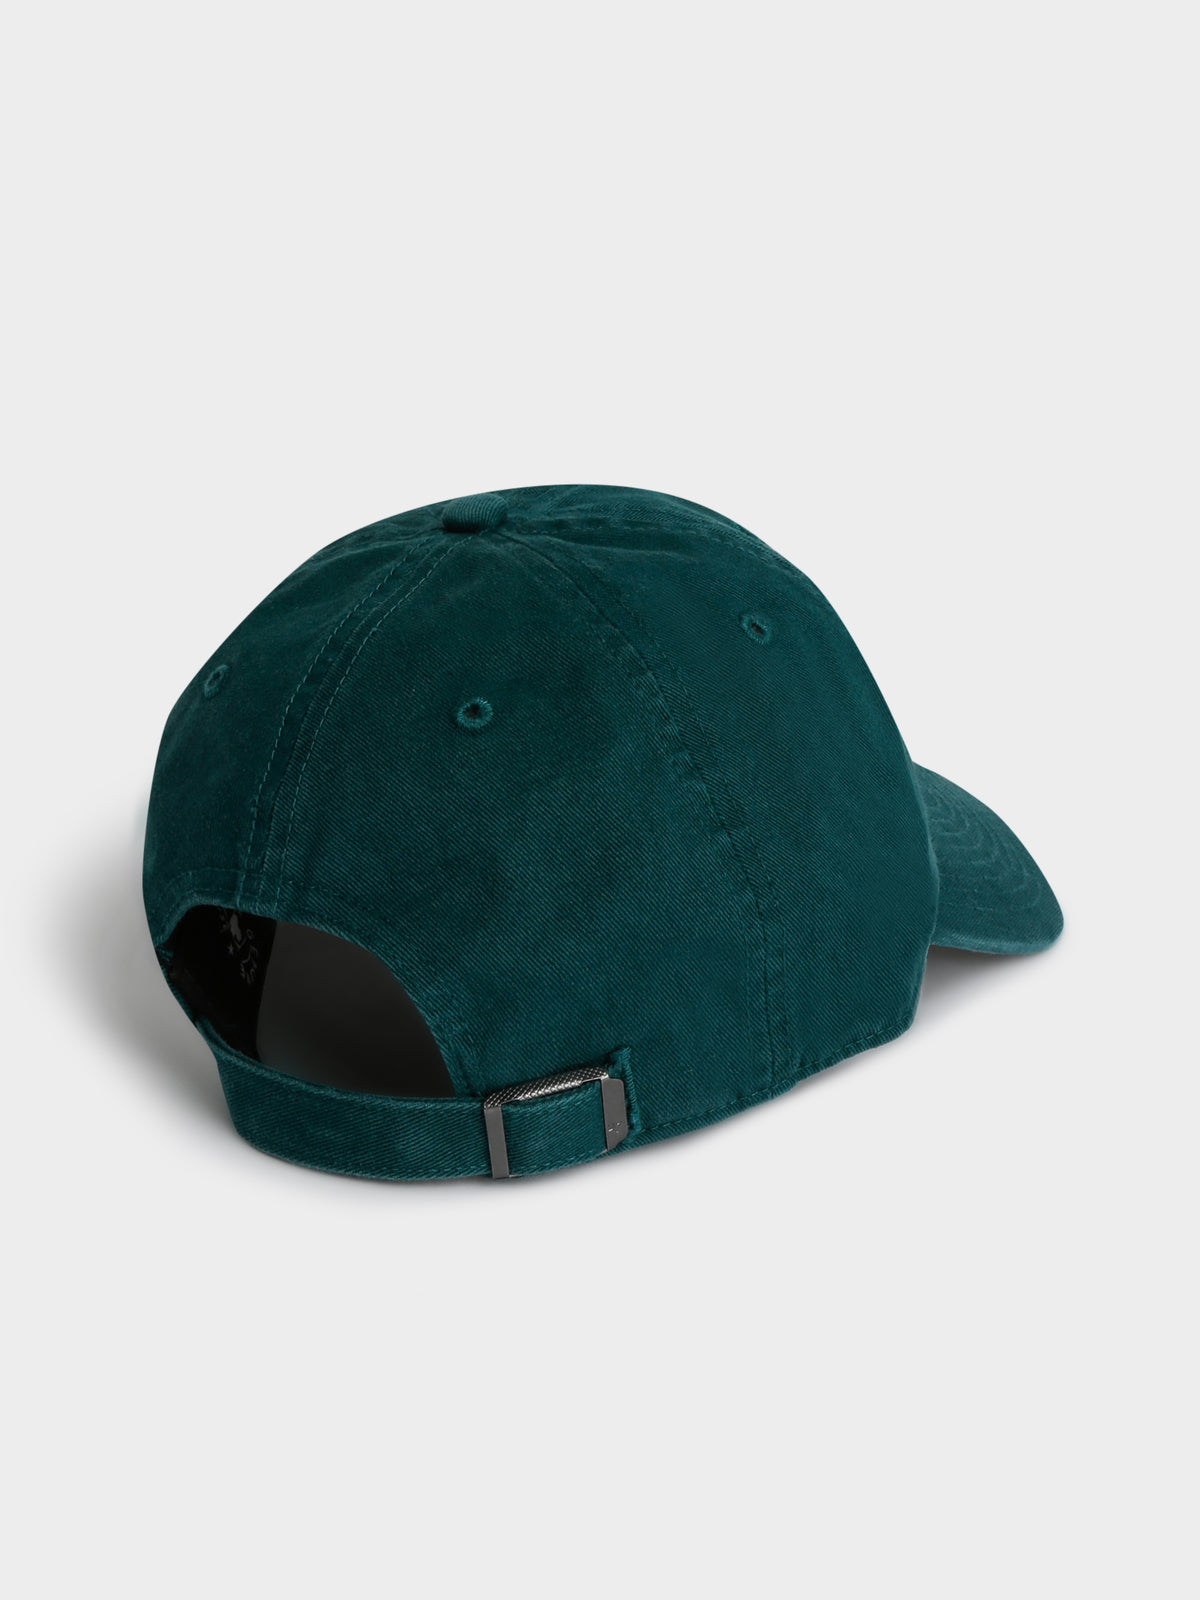 NY Yankees 47 Clean Up Cap in Pacific Green